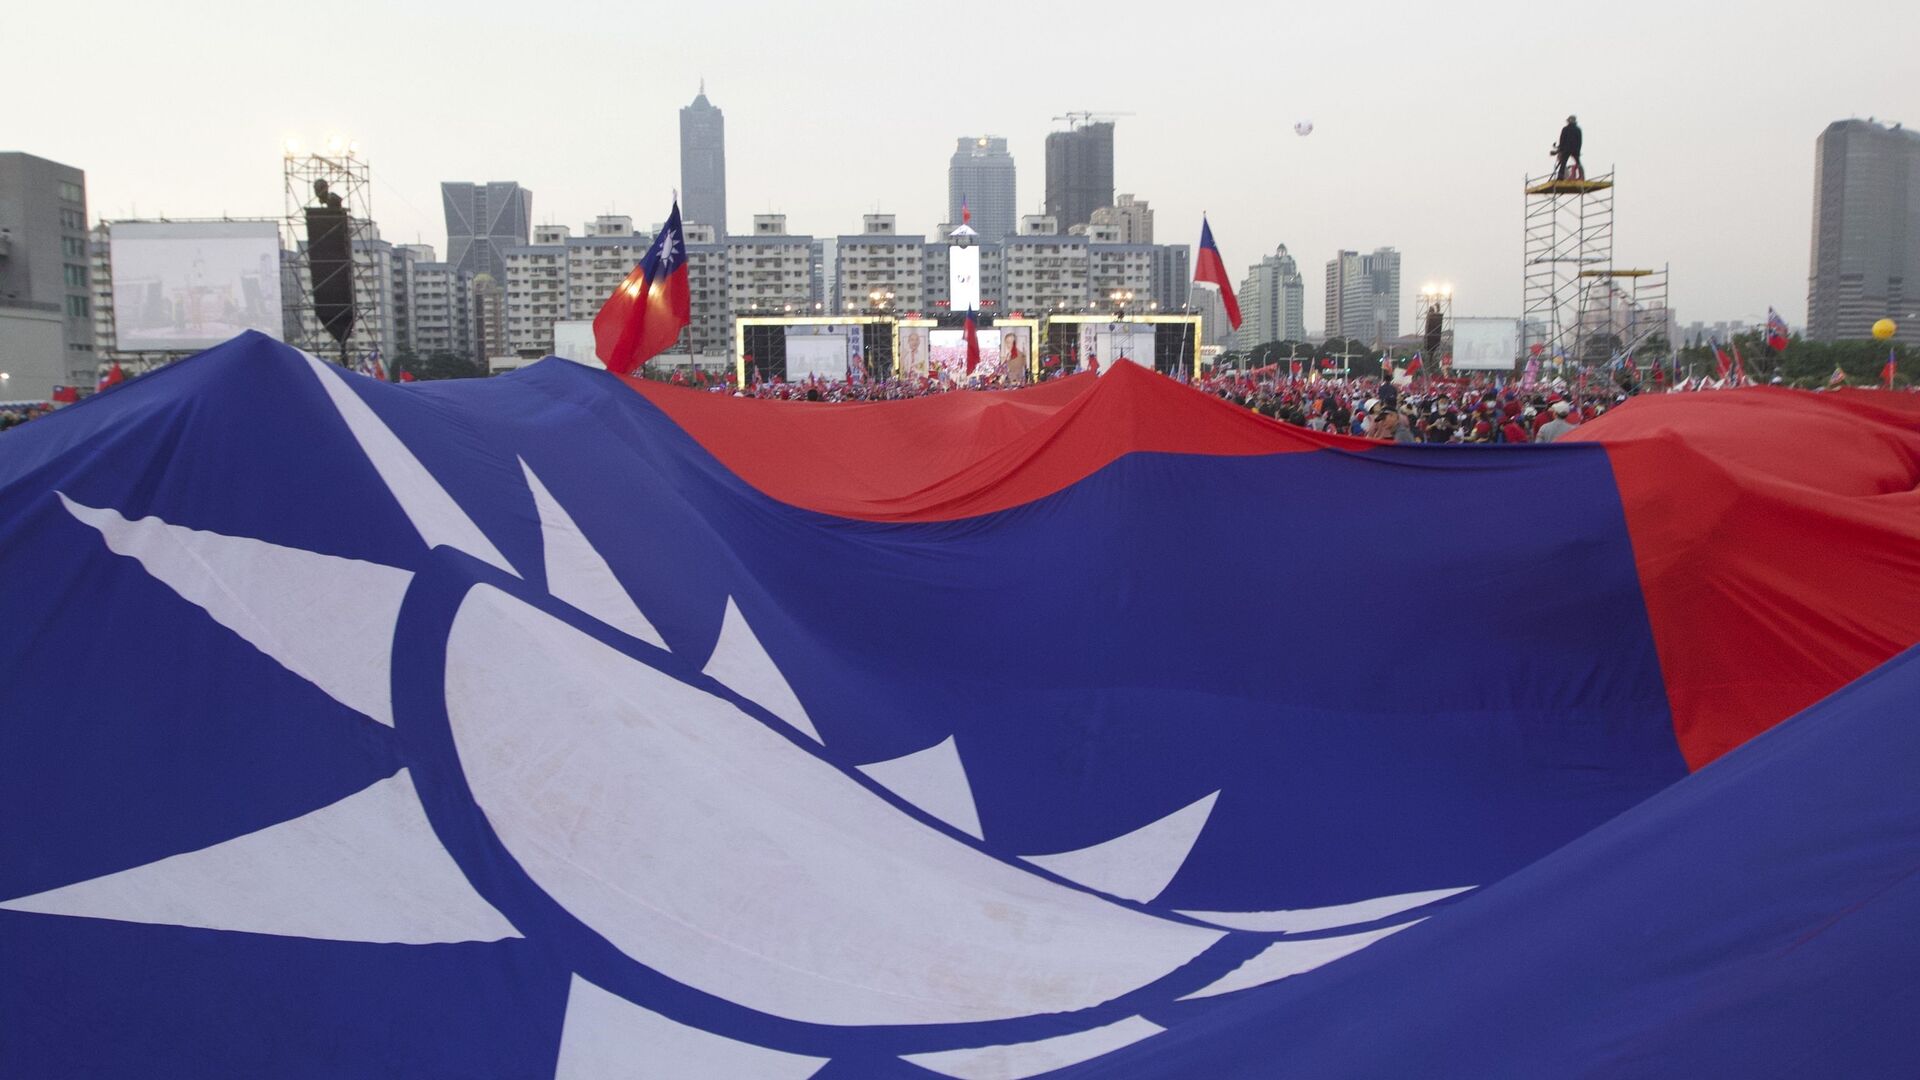 Supporters of Taiwan's 2020 presidential election candidate for the KMT, or Nationalist Party, Han Kuo-yu pass along a giant Taiwanese flag for the start of a campaign rally in southern Taiwan's Kaohsiung city on Friday, Jan 10, 2020 - Sputnik International, 1920, 24.03.2022